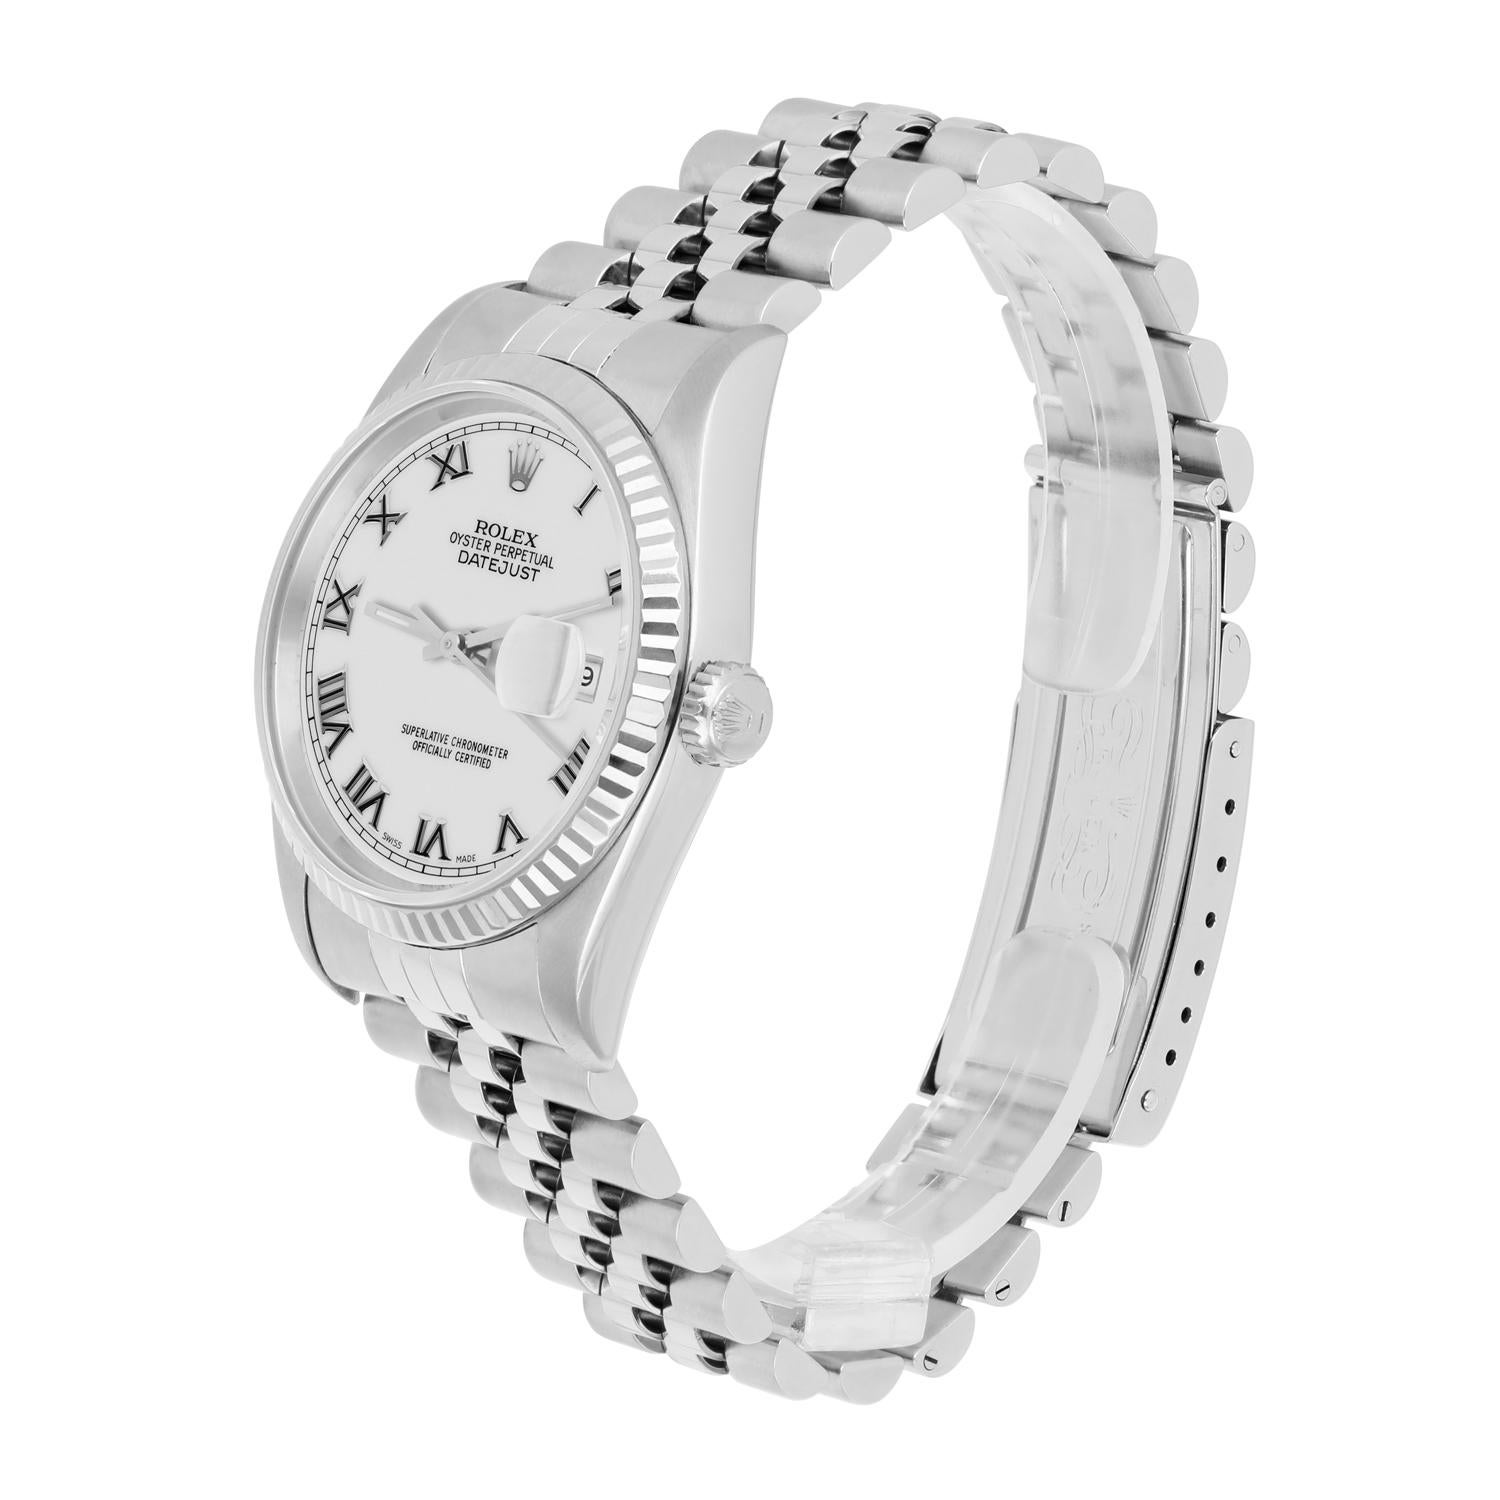 Women's or Men's Rolex Datejust 36mm Stainless Steel 16234 White Roman Dial, Jubilee Circa 1995 For Sale